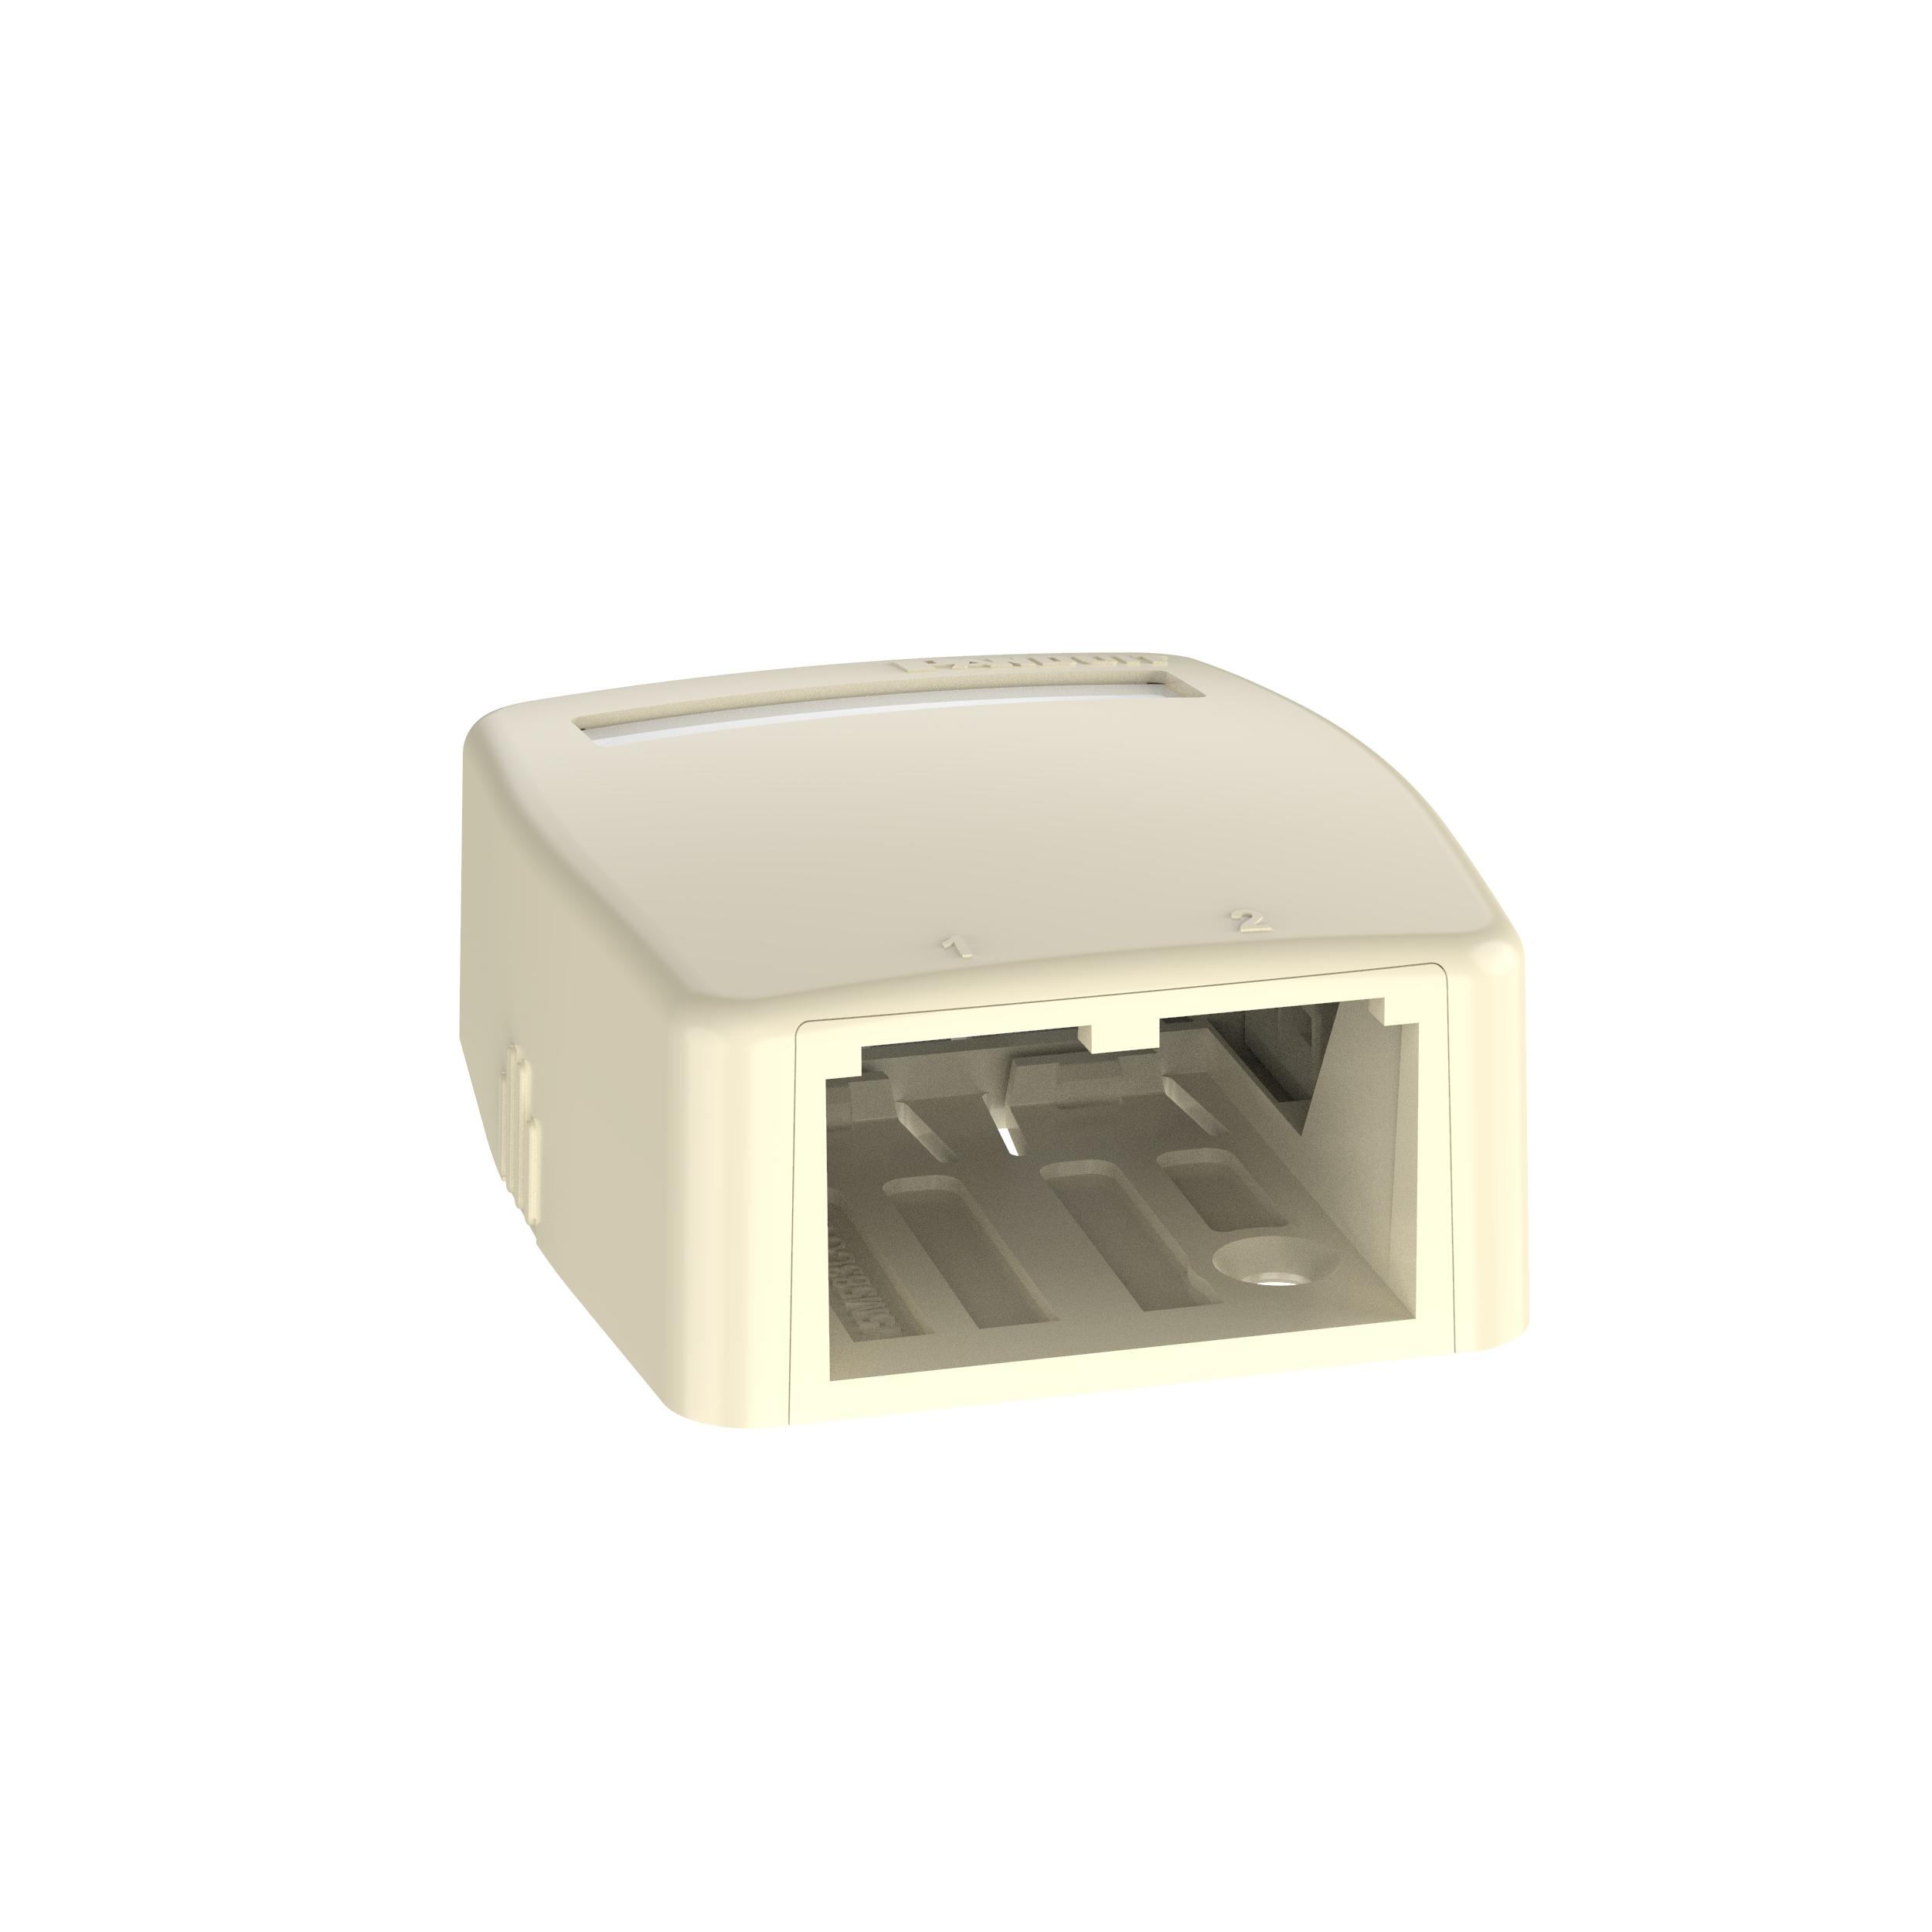 Panduit CBXQ2EI-A SURFACE MNT BOX 2-PORT MINICOMW/ QUICK RELEASE COVER ANDADHESIVE, IVORY